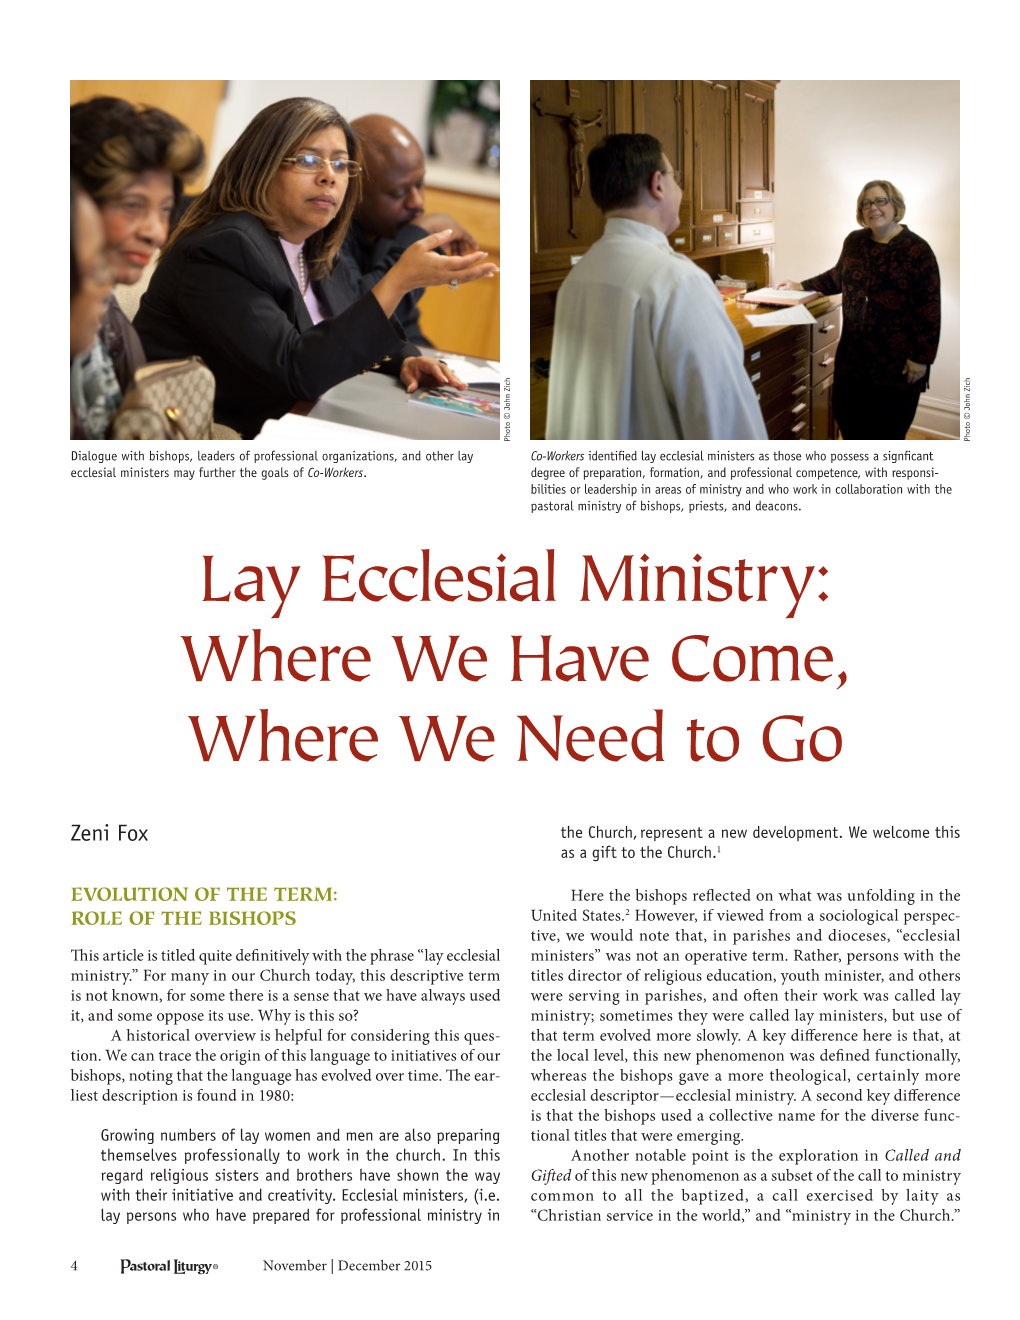 Lay Ecclesial Ministry: Where We Have Come, Where We Need to Go